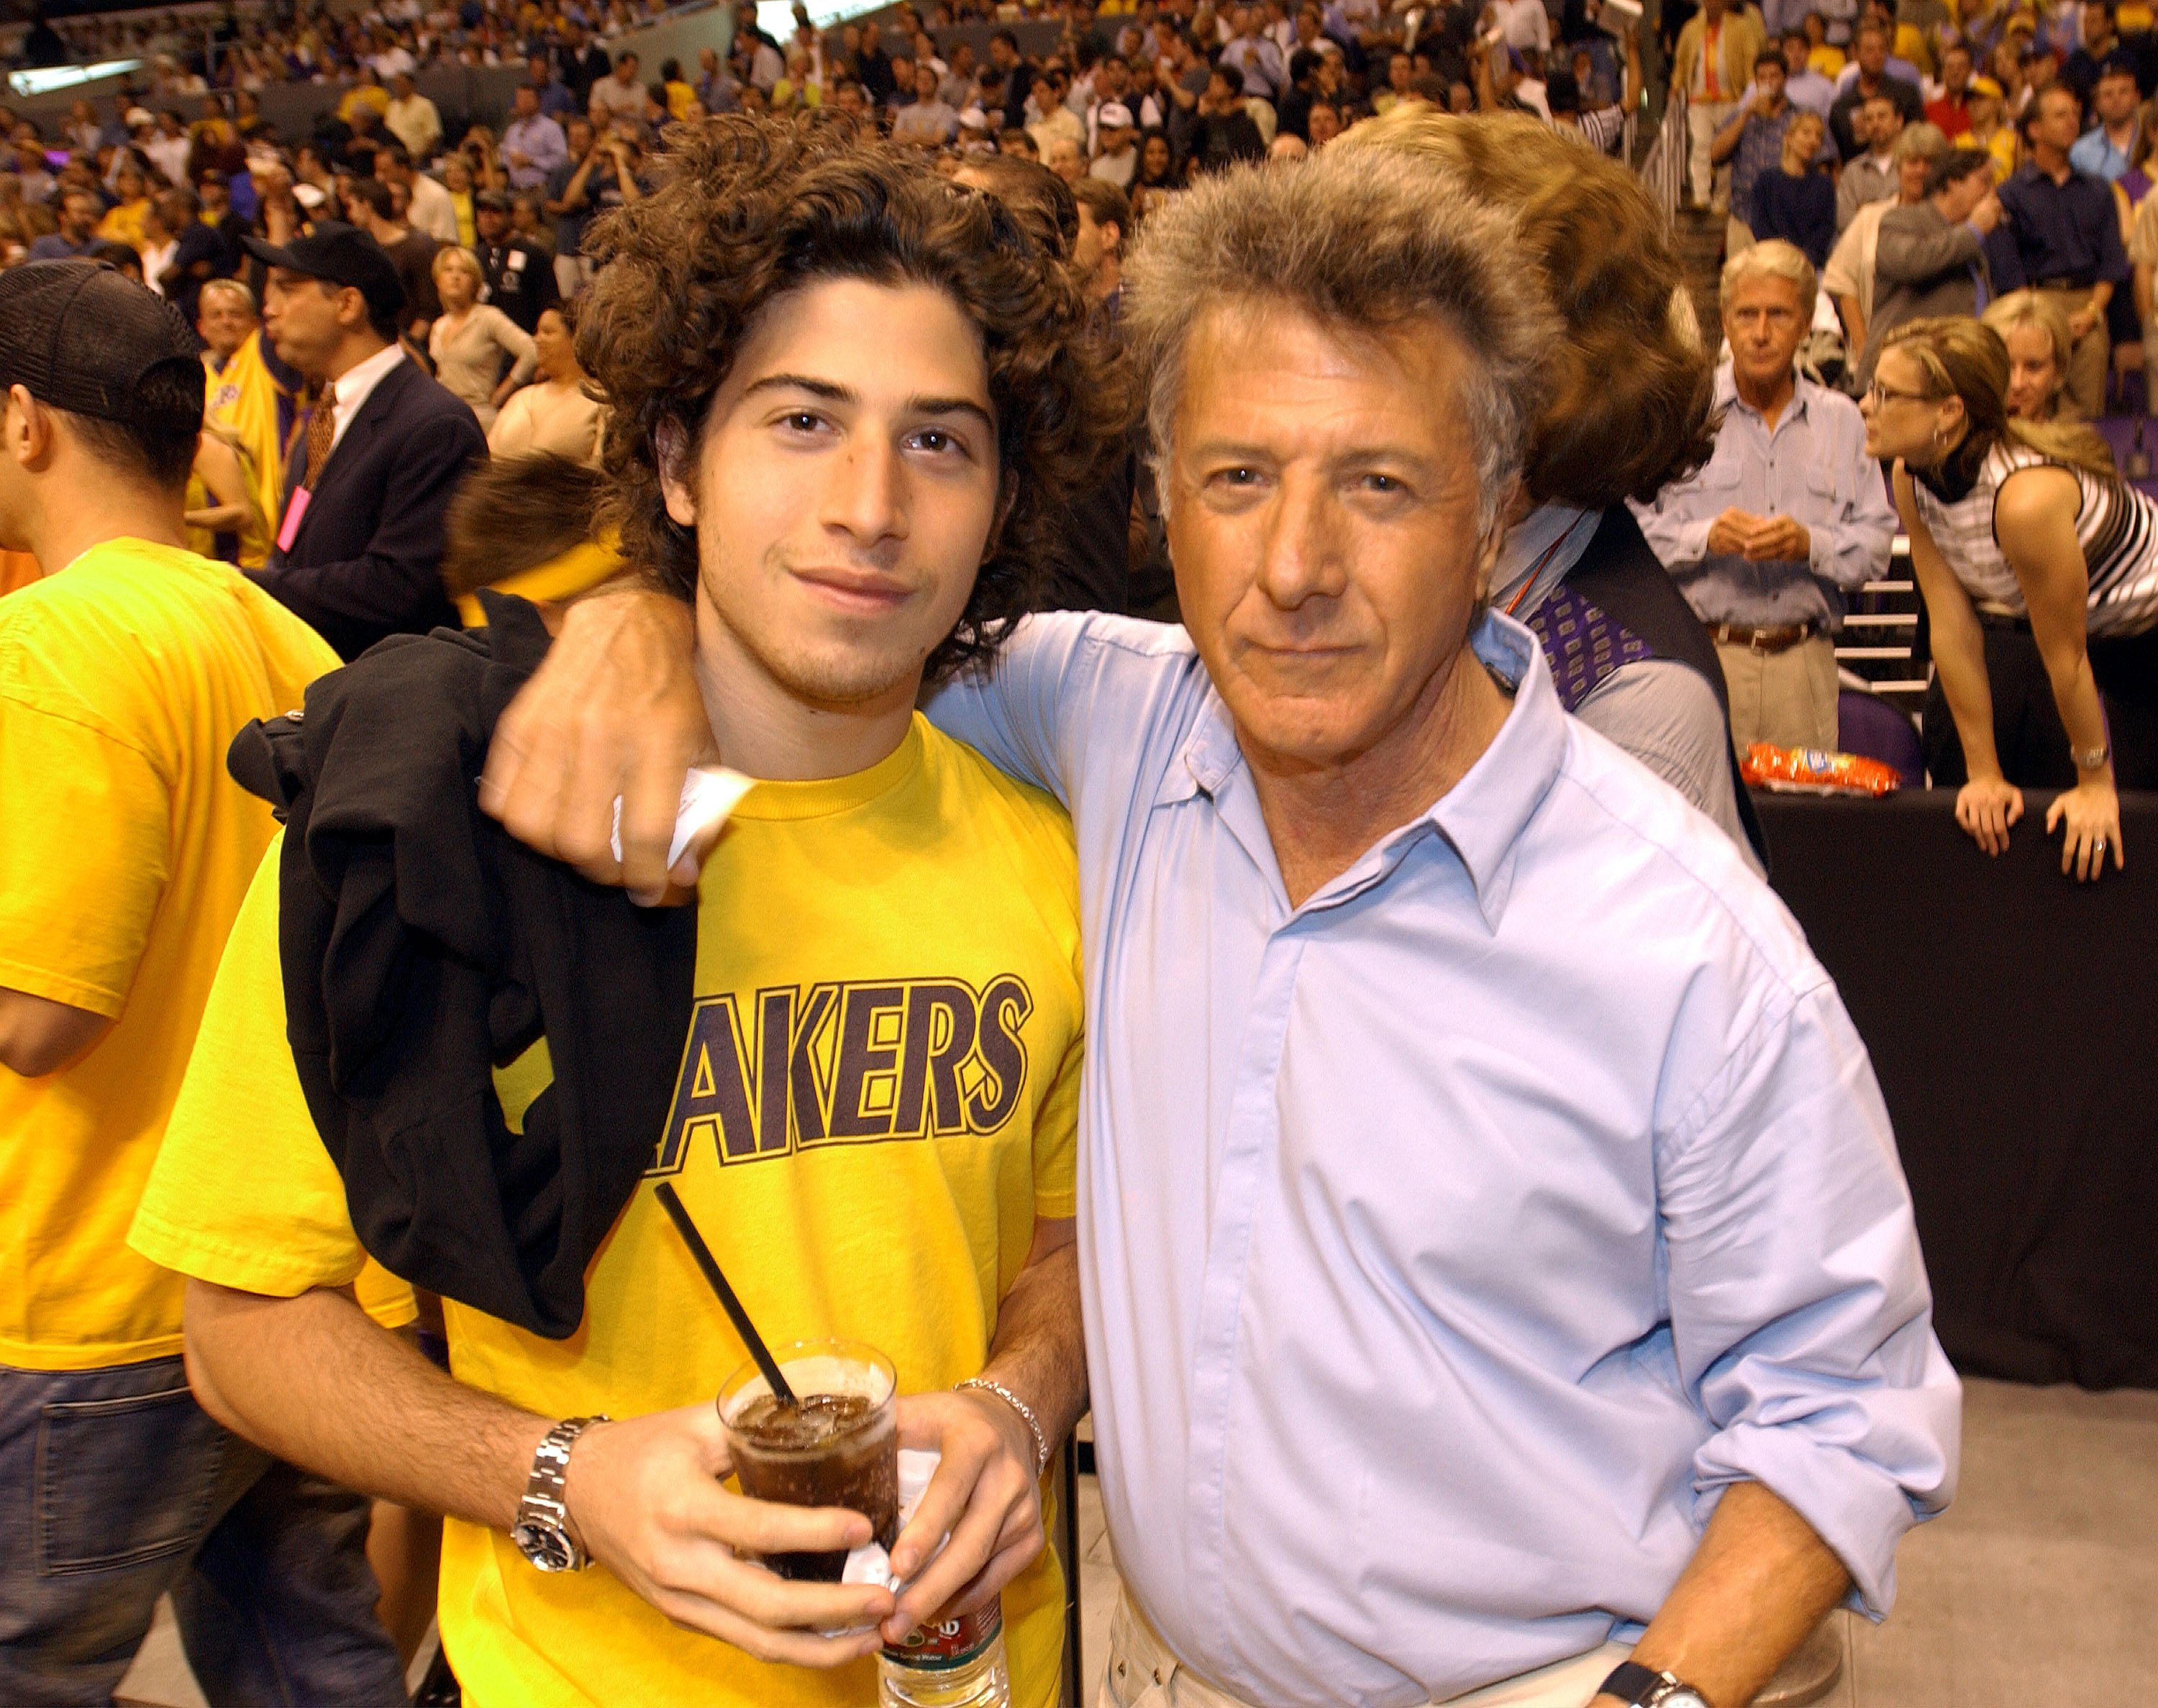 Dustin Hoffman and son, Max attend Game 1 of the NBA Finals between the Los Angeles Lakers and the New Jersey Nets June 5, 2002 at Staples Center in Los Angeles, California | Photo: Getty Images